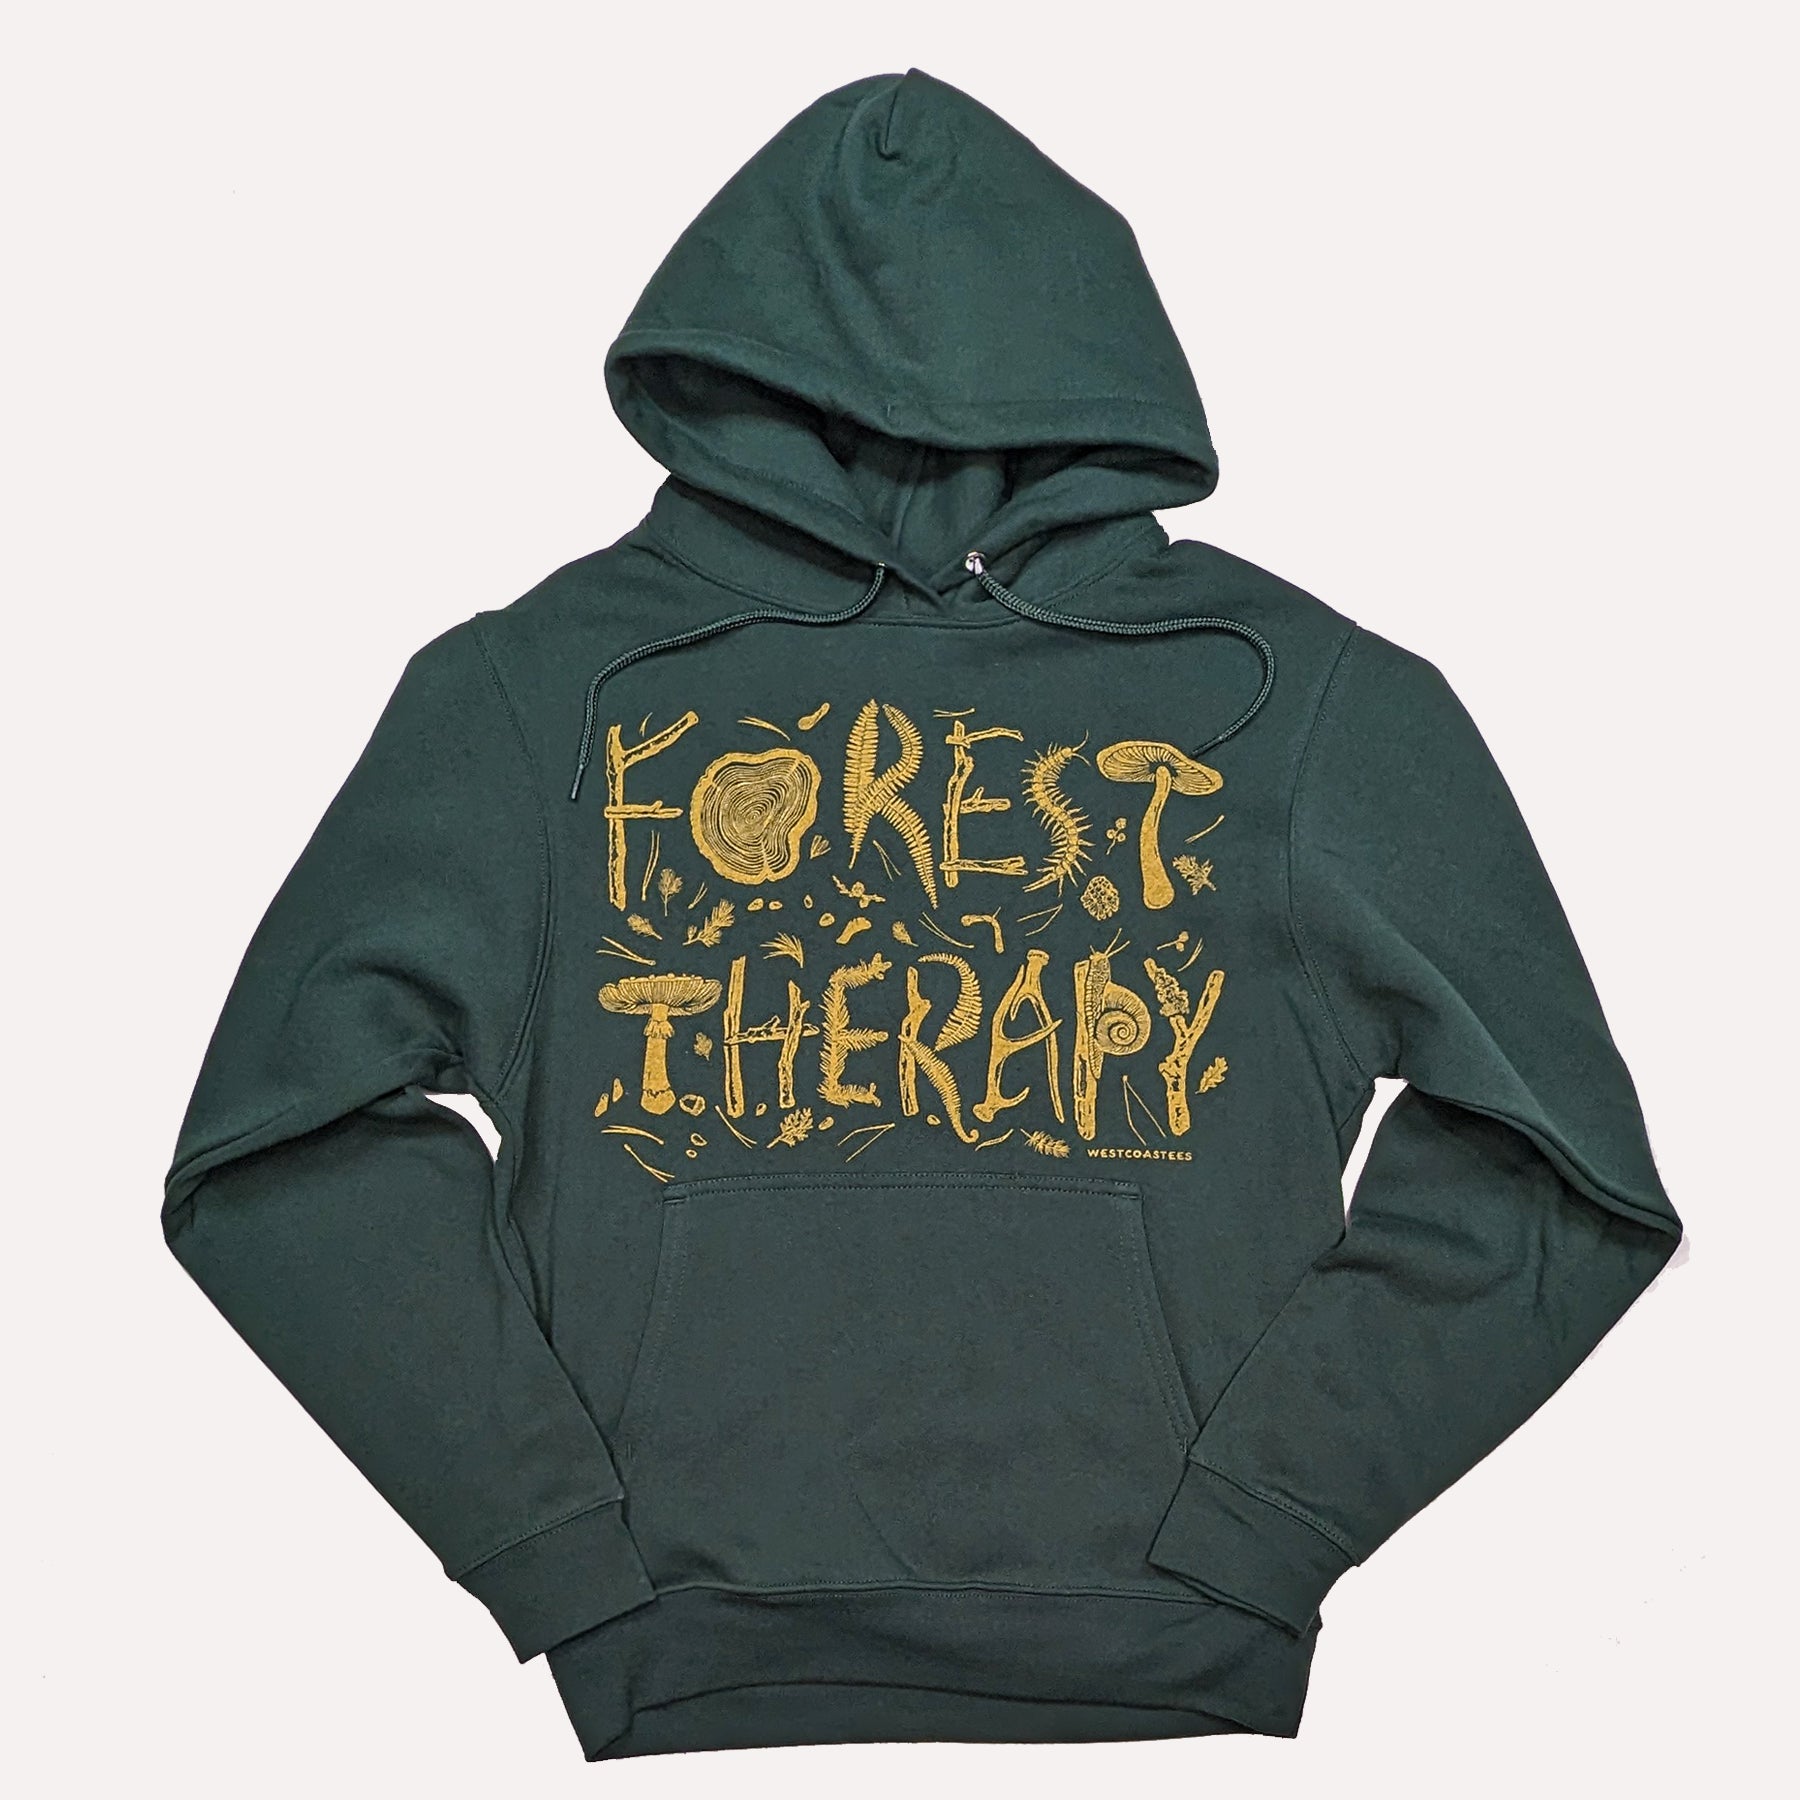 Adult Unisex Forest Therapy Hoodie, WOMEN'S SWEATERS, Westcoastees, www.westcoastees.com